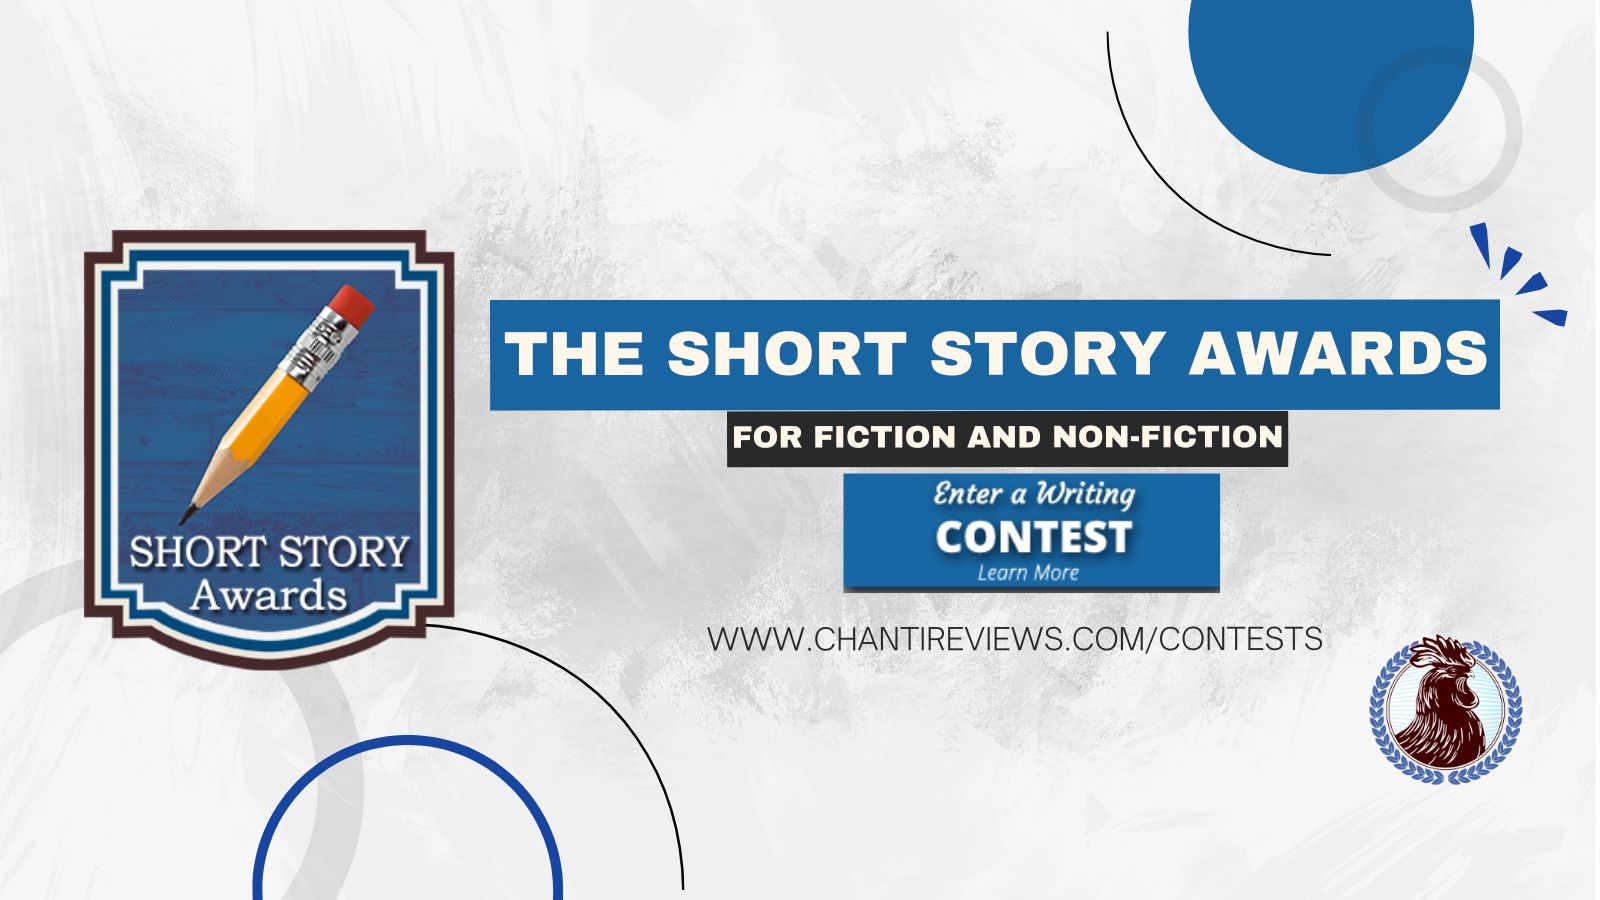 Short Story Book Awards, invitation to submit by August 31, 2023